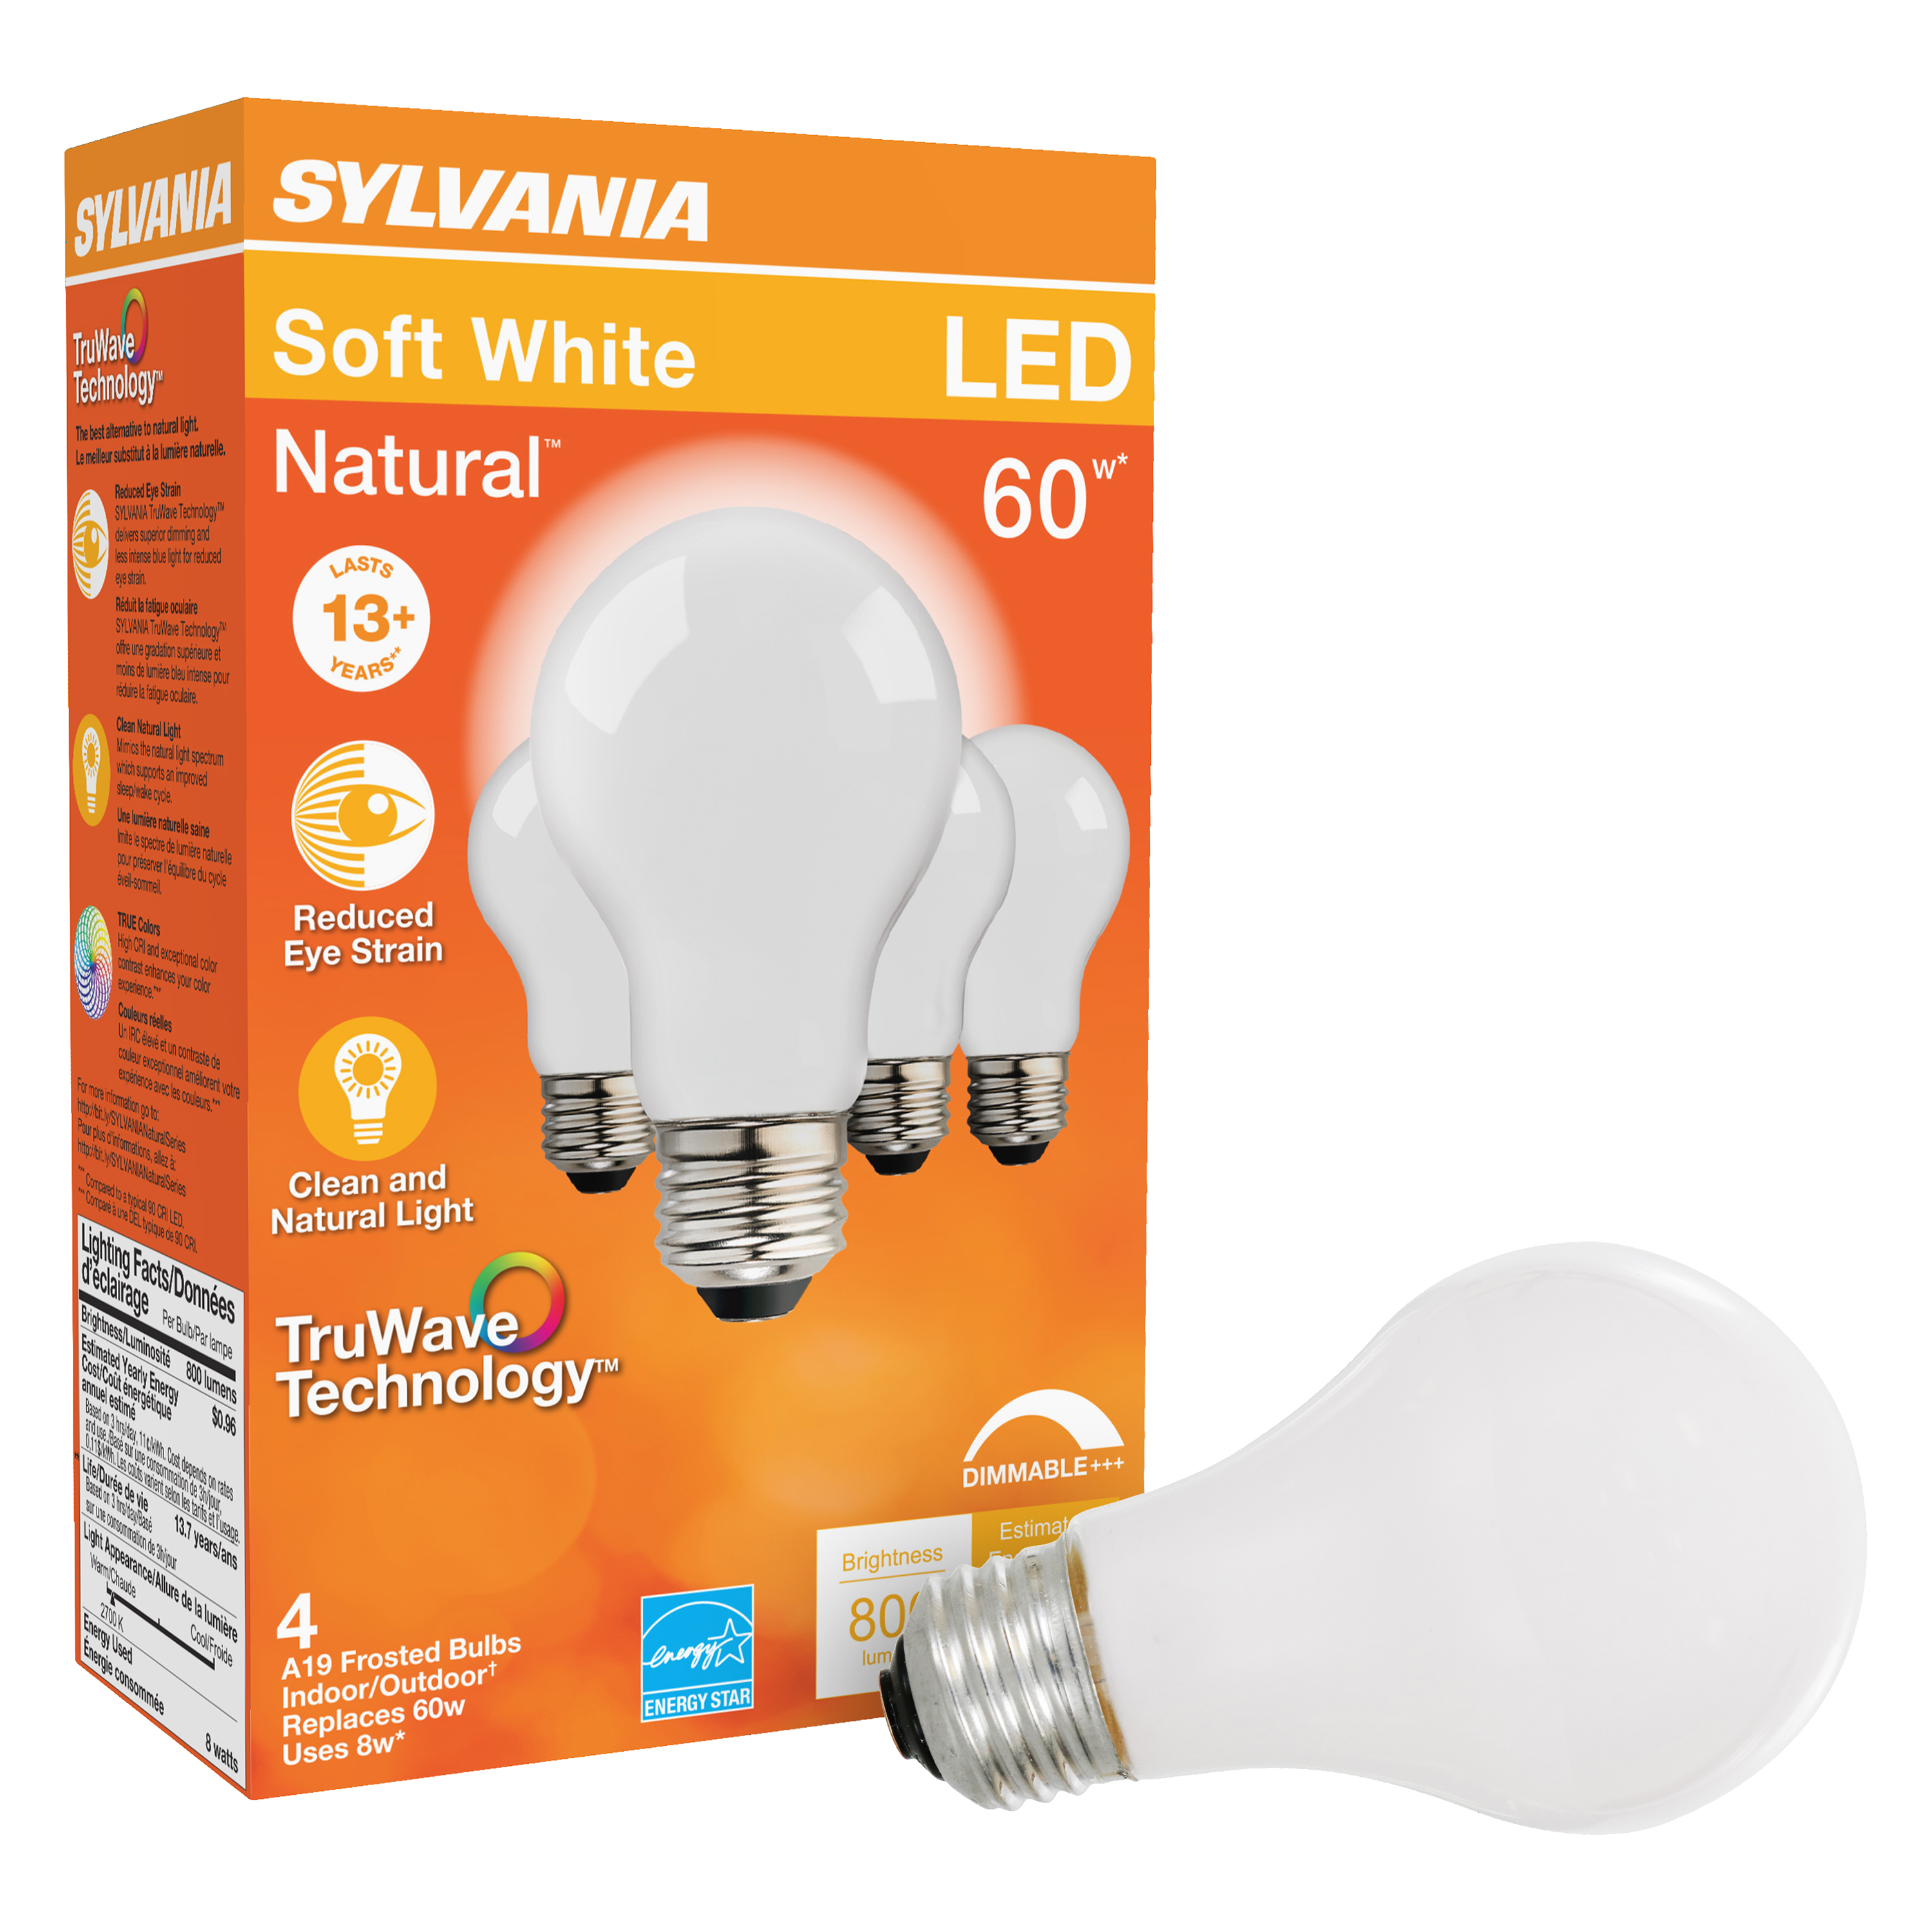 Sylvania 40670 LED Bulb, General Purpose, A19 Lamp, E26 Lamp Base, Dimmable, Frosted, Soft White Light